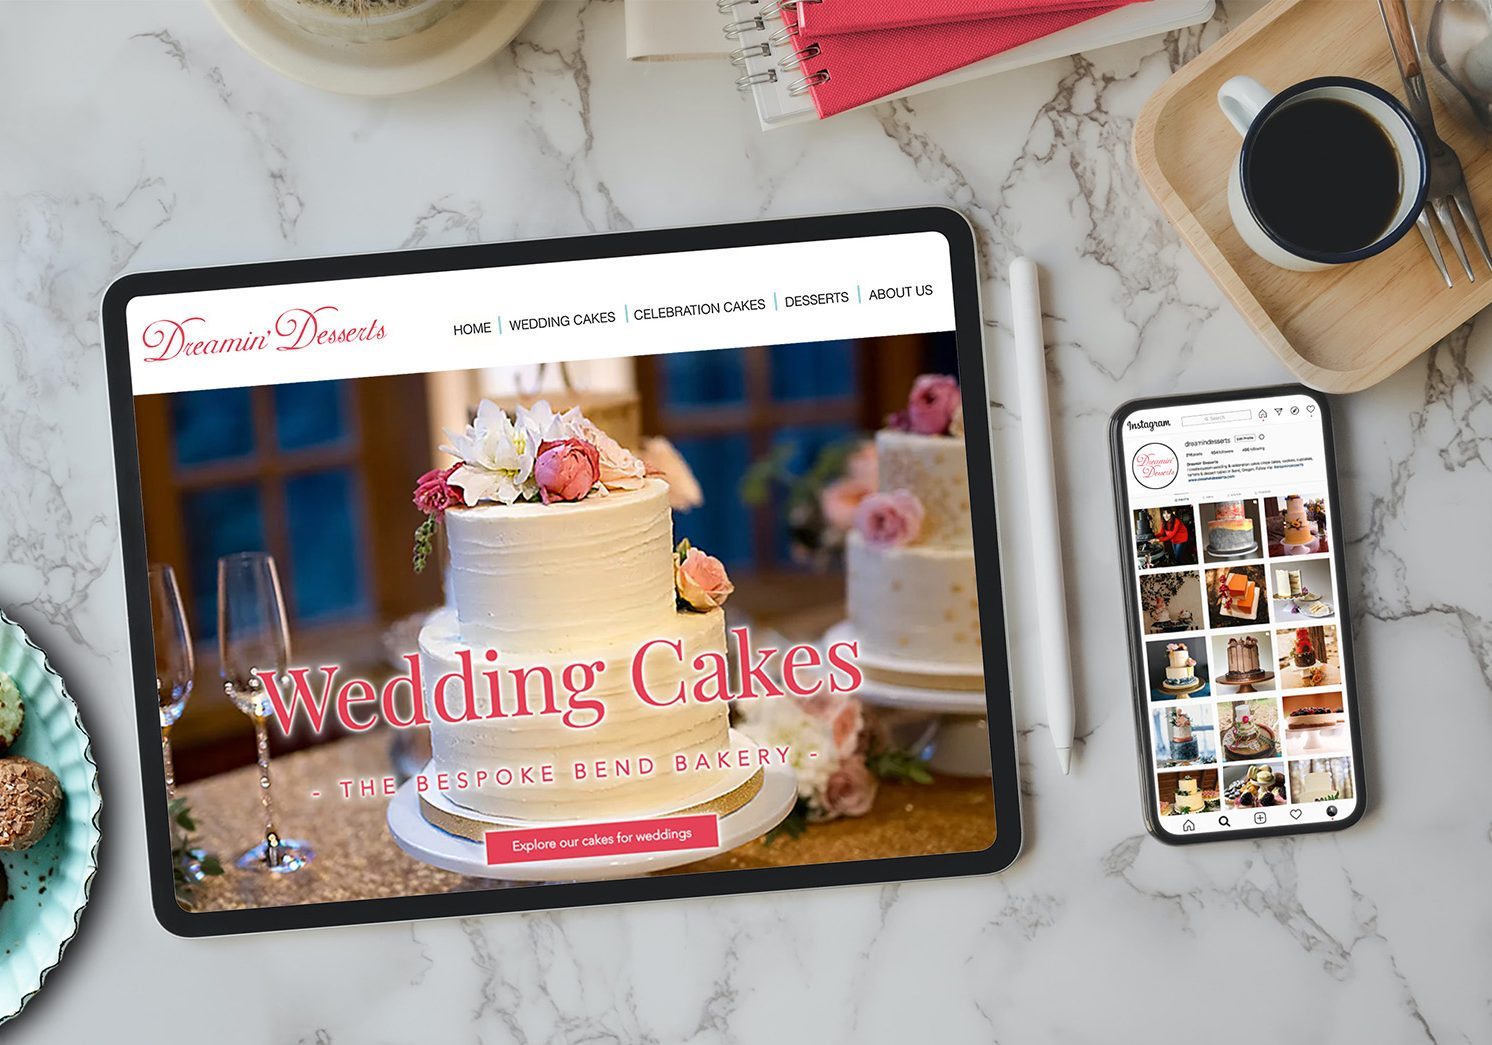 Dreamin' Desserts website on tablet & Instagram page on iPhone